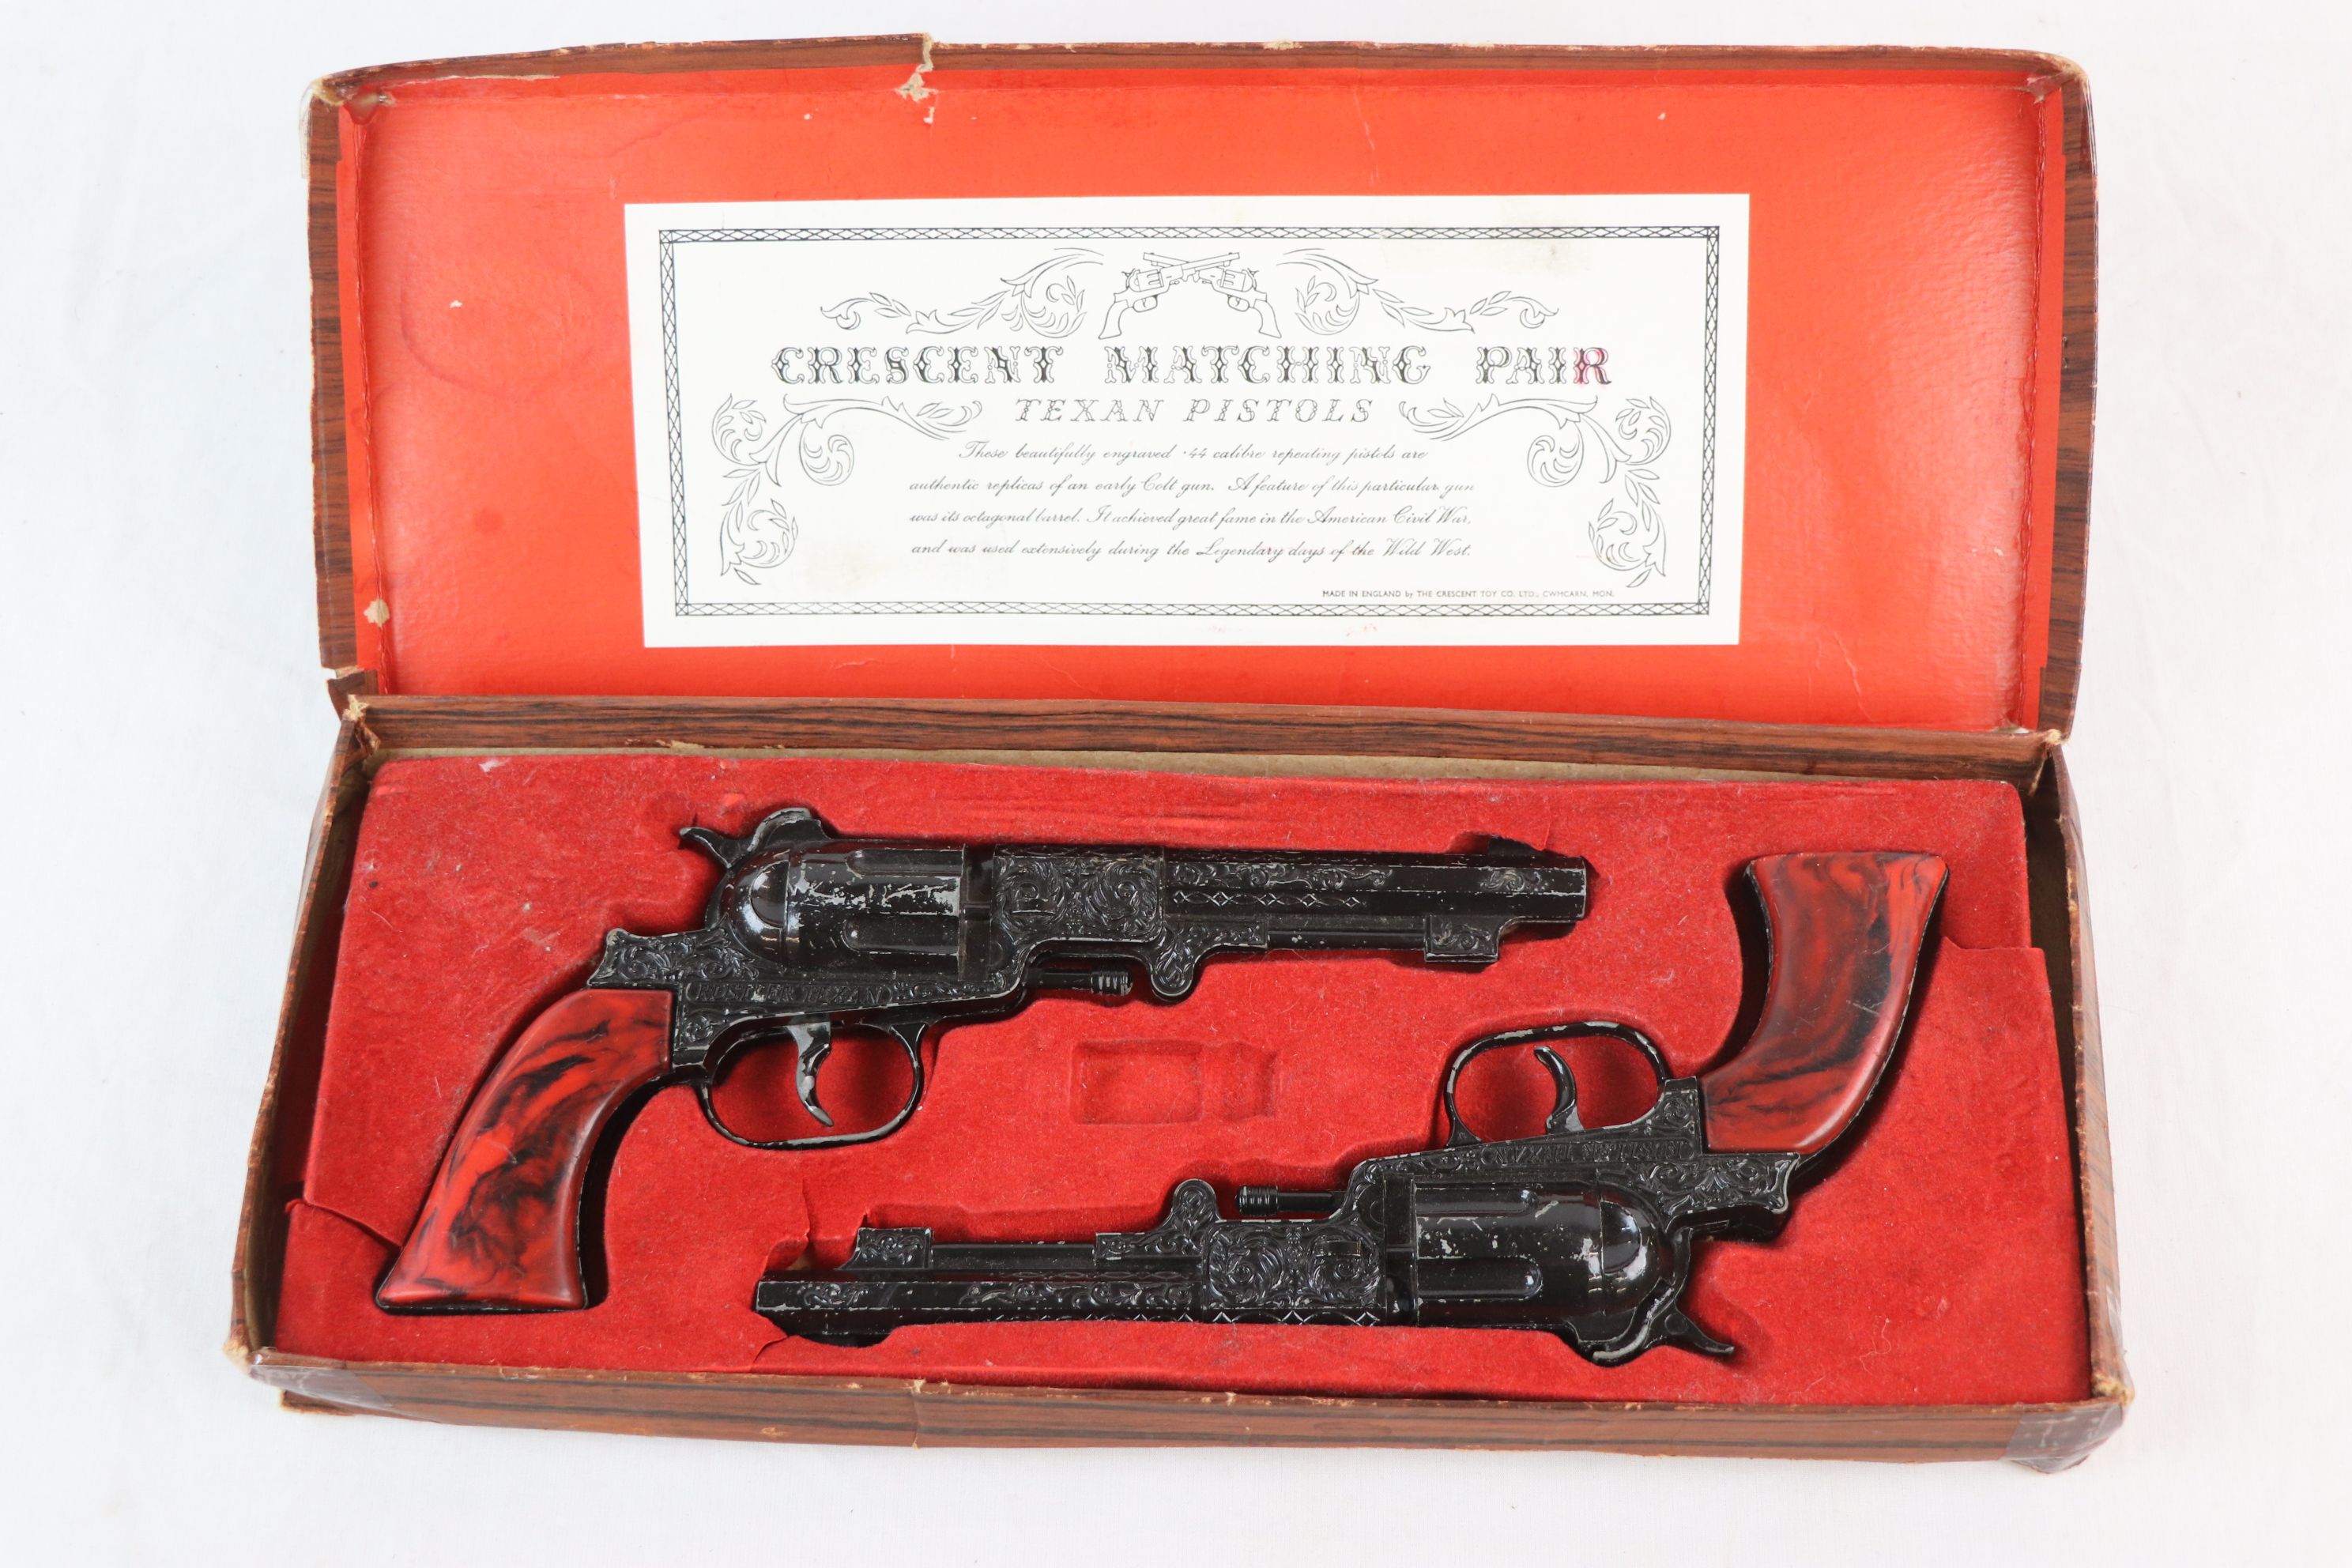 Boxed Crescent Matching Pair Texan Pistols black & red finish